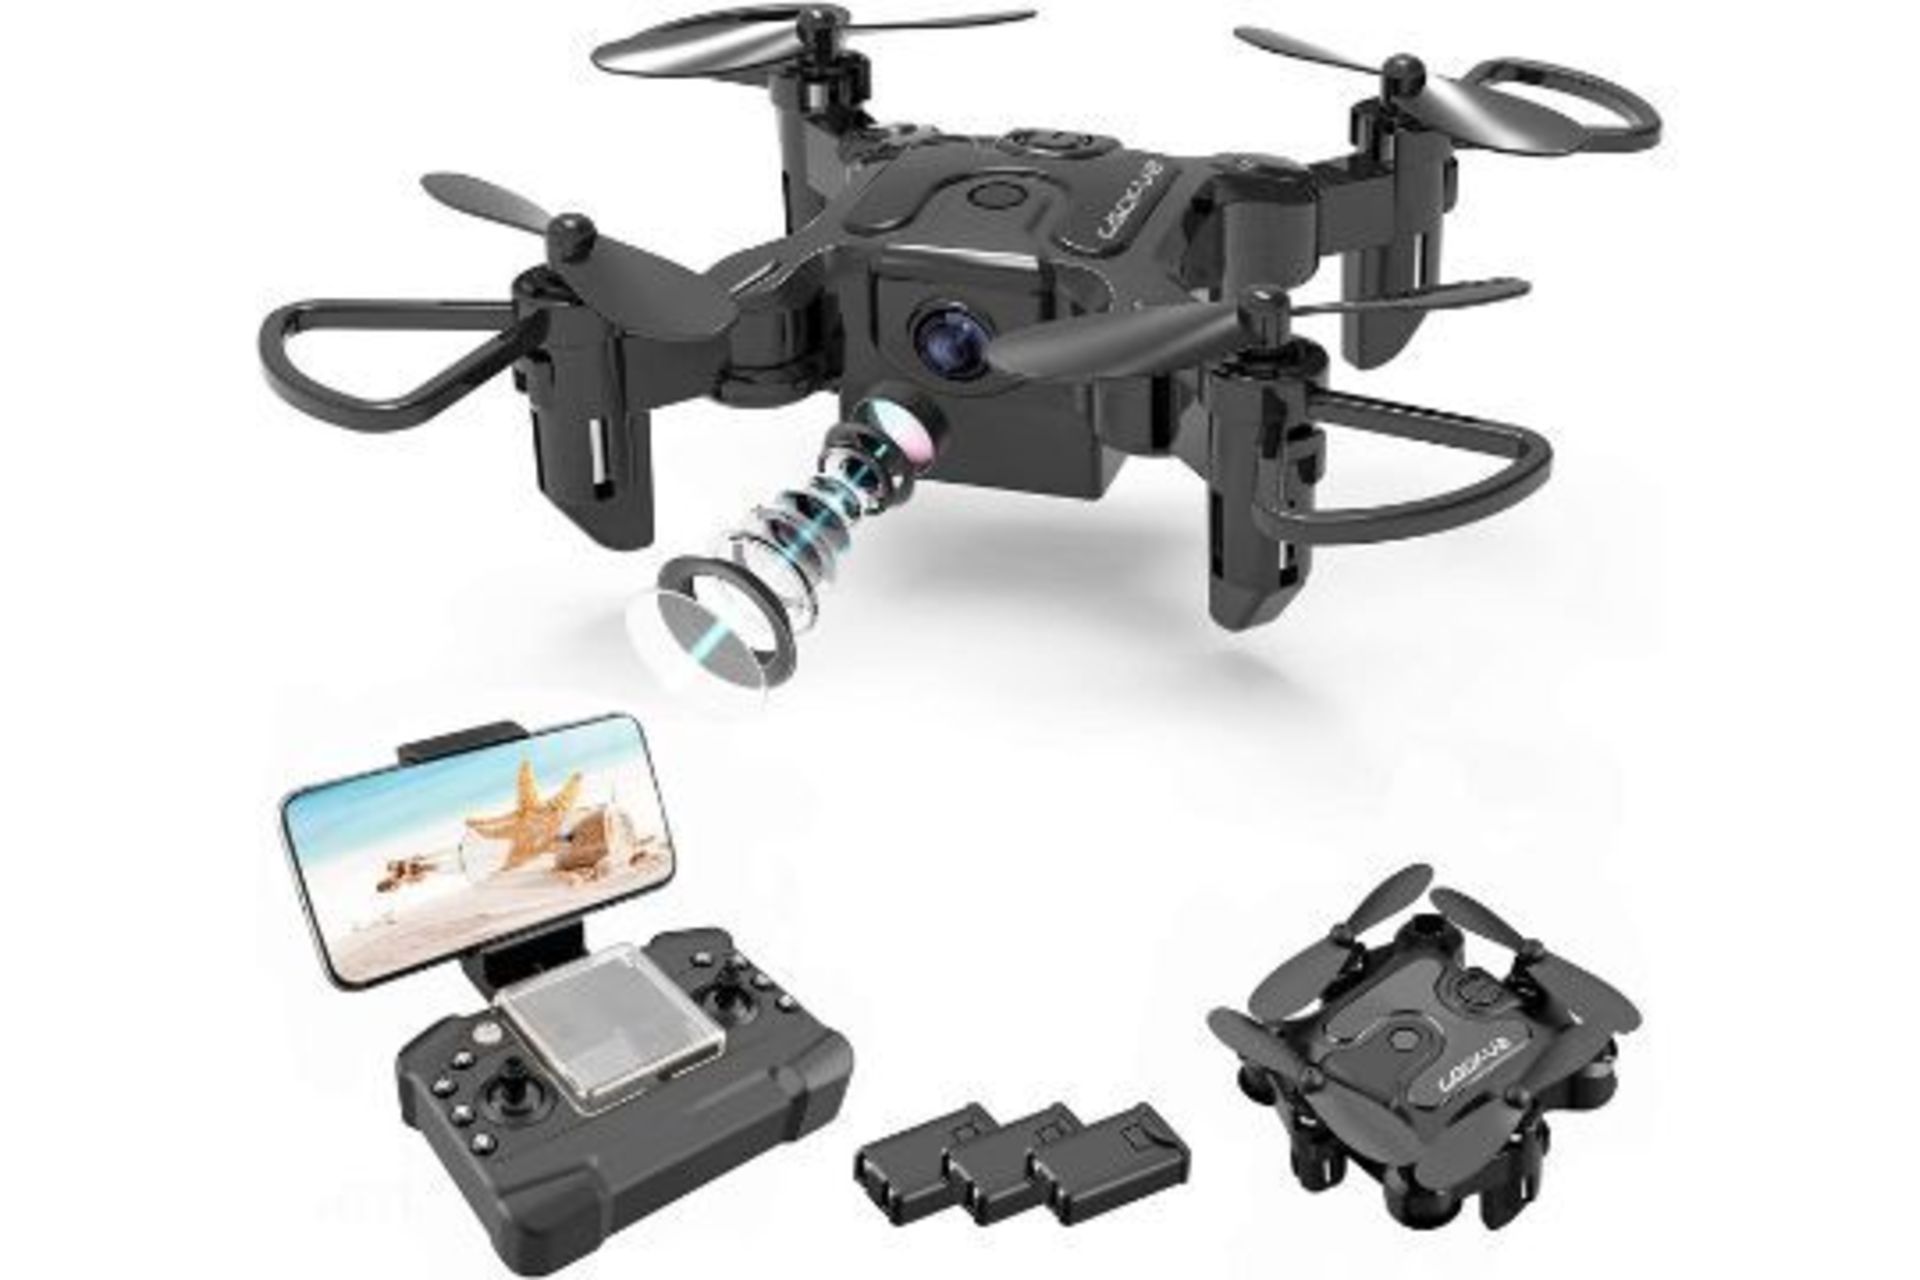 3 x Boxed 4D-V2 Mini Drone (row4). ?HD Pictures and Live Videos?:V2 equipped with 720P HD Wi-Fi